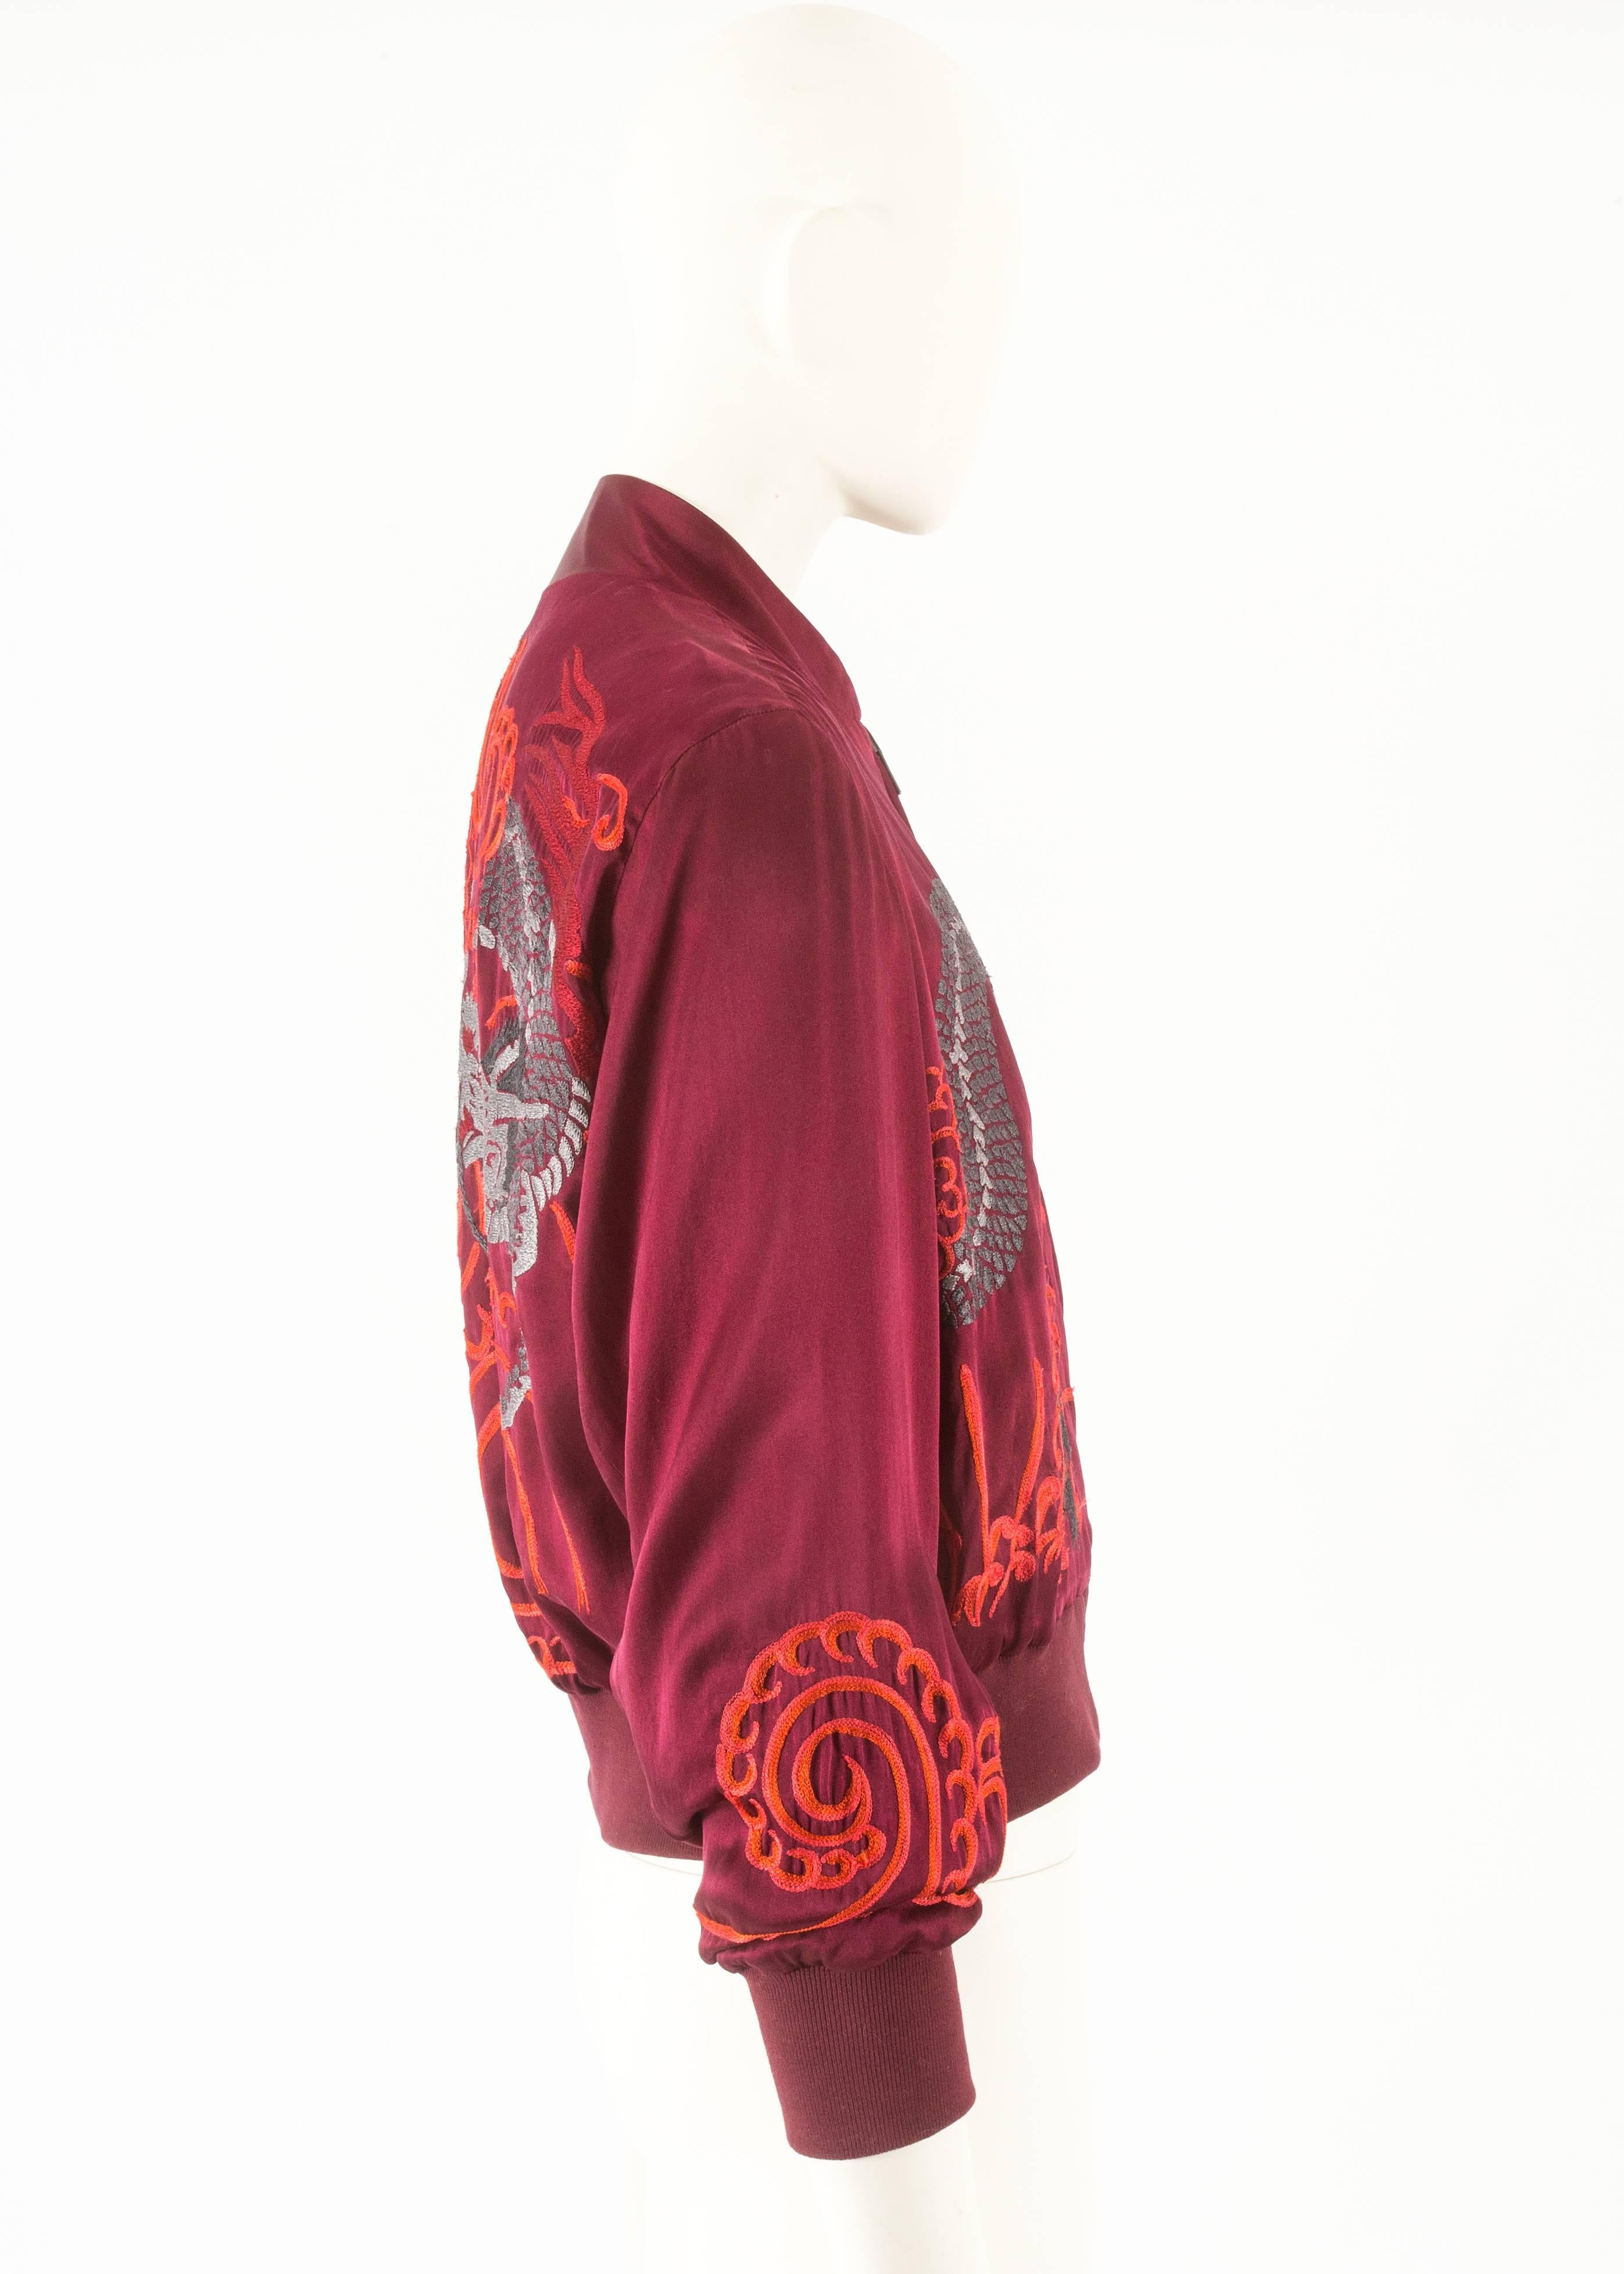 Women's or Men's Tom Ford for Gucci unisex reversible embroidered silk jacket, Spring-Summer 2001